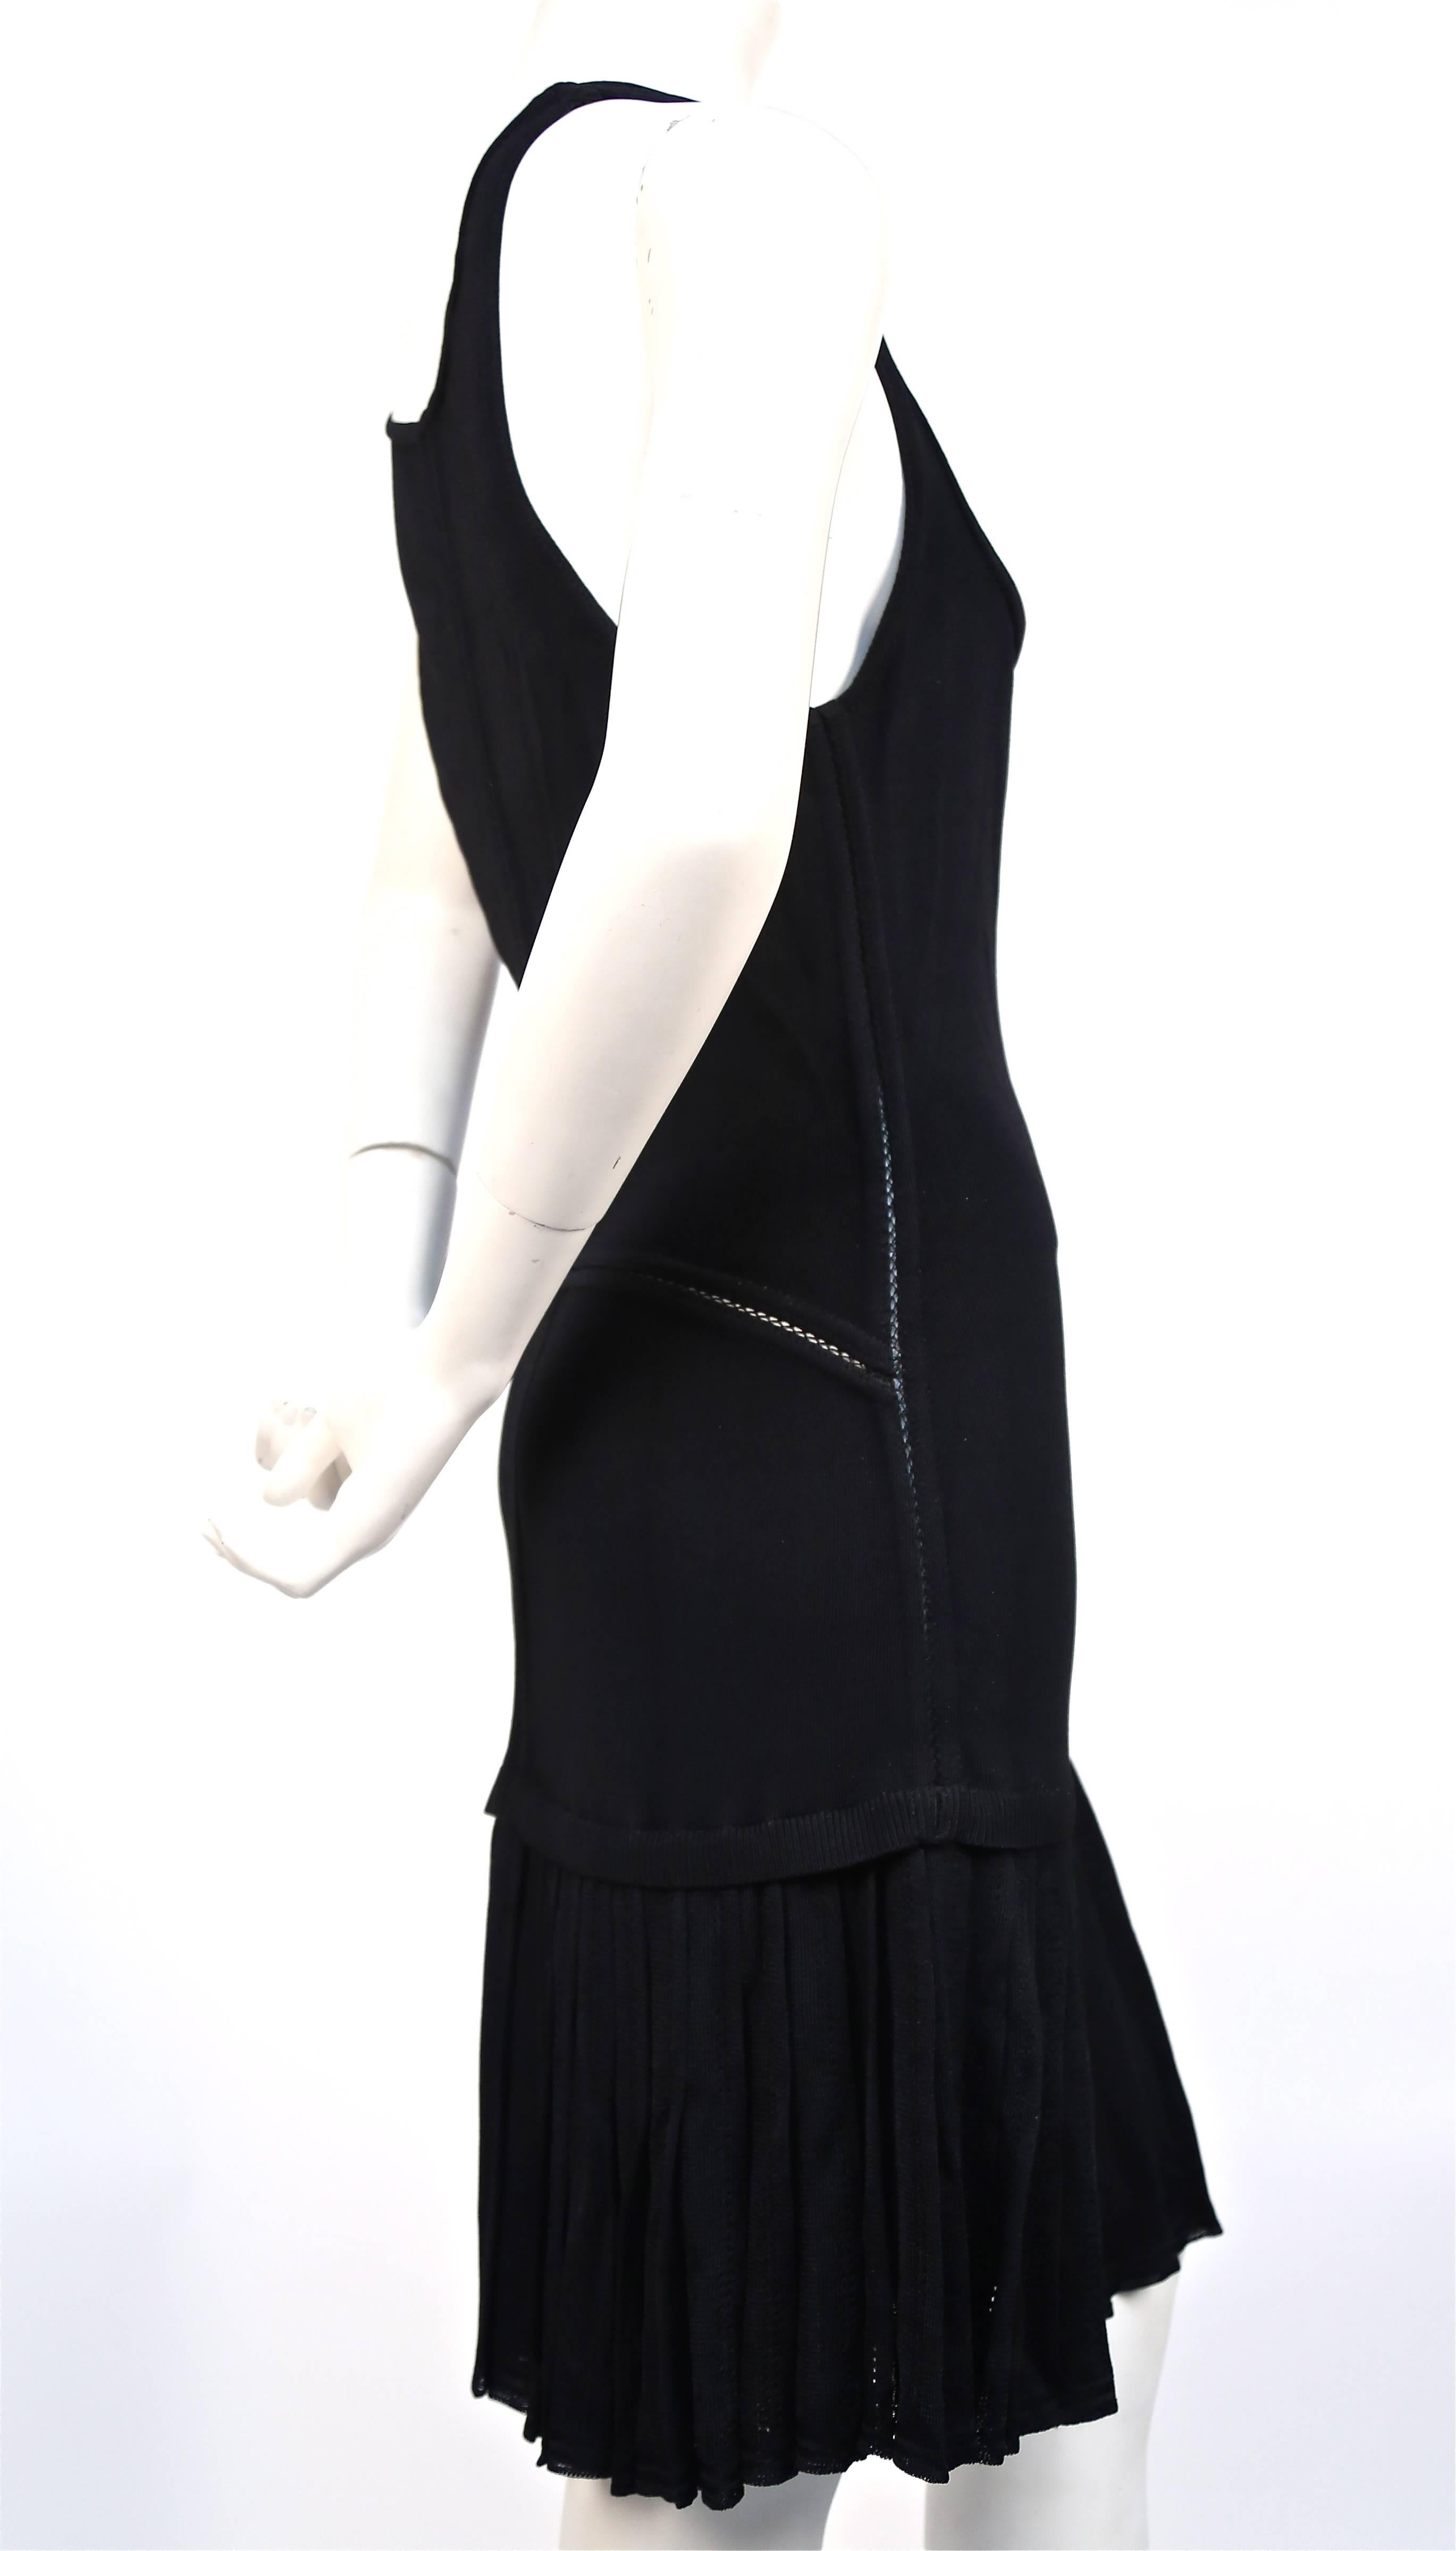 Black knit dress with drop waist and pleated skirt from Azzedine Alaia dating to the 1990's. Labeled a size 'M'. Approximate un-stretched measurements laying flat: bust 33-34